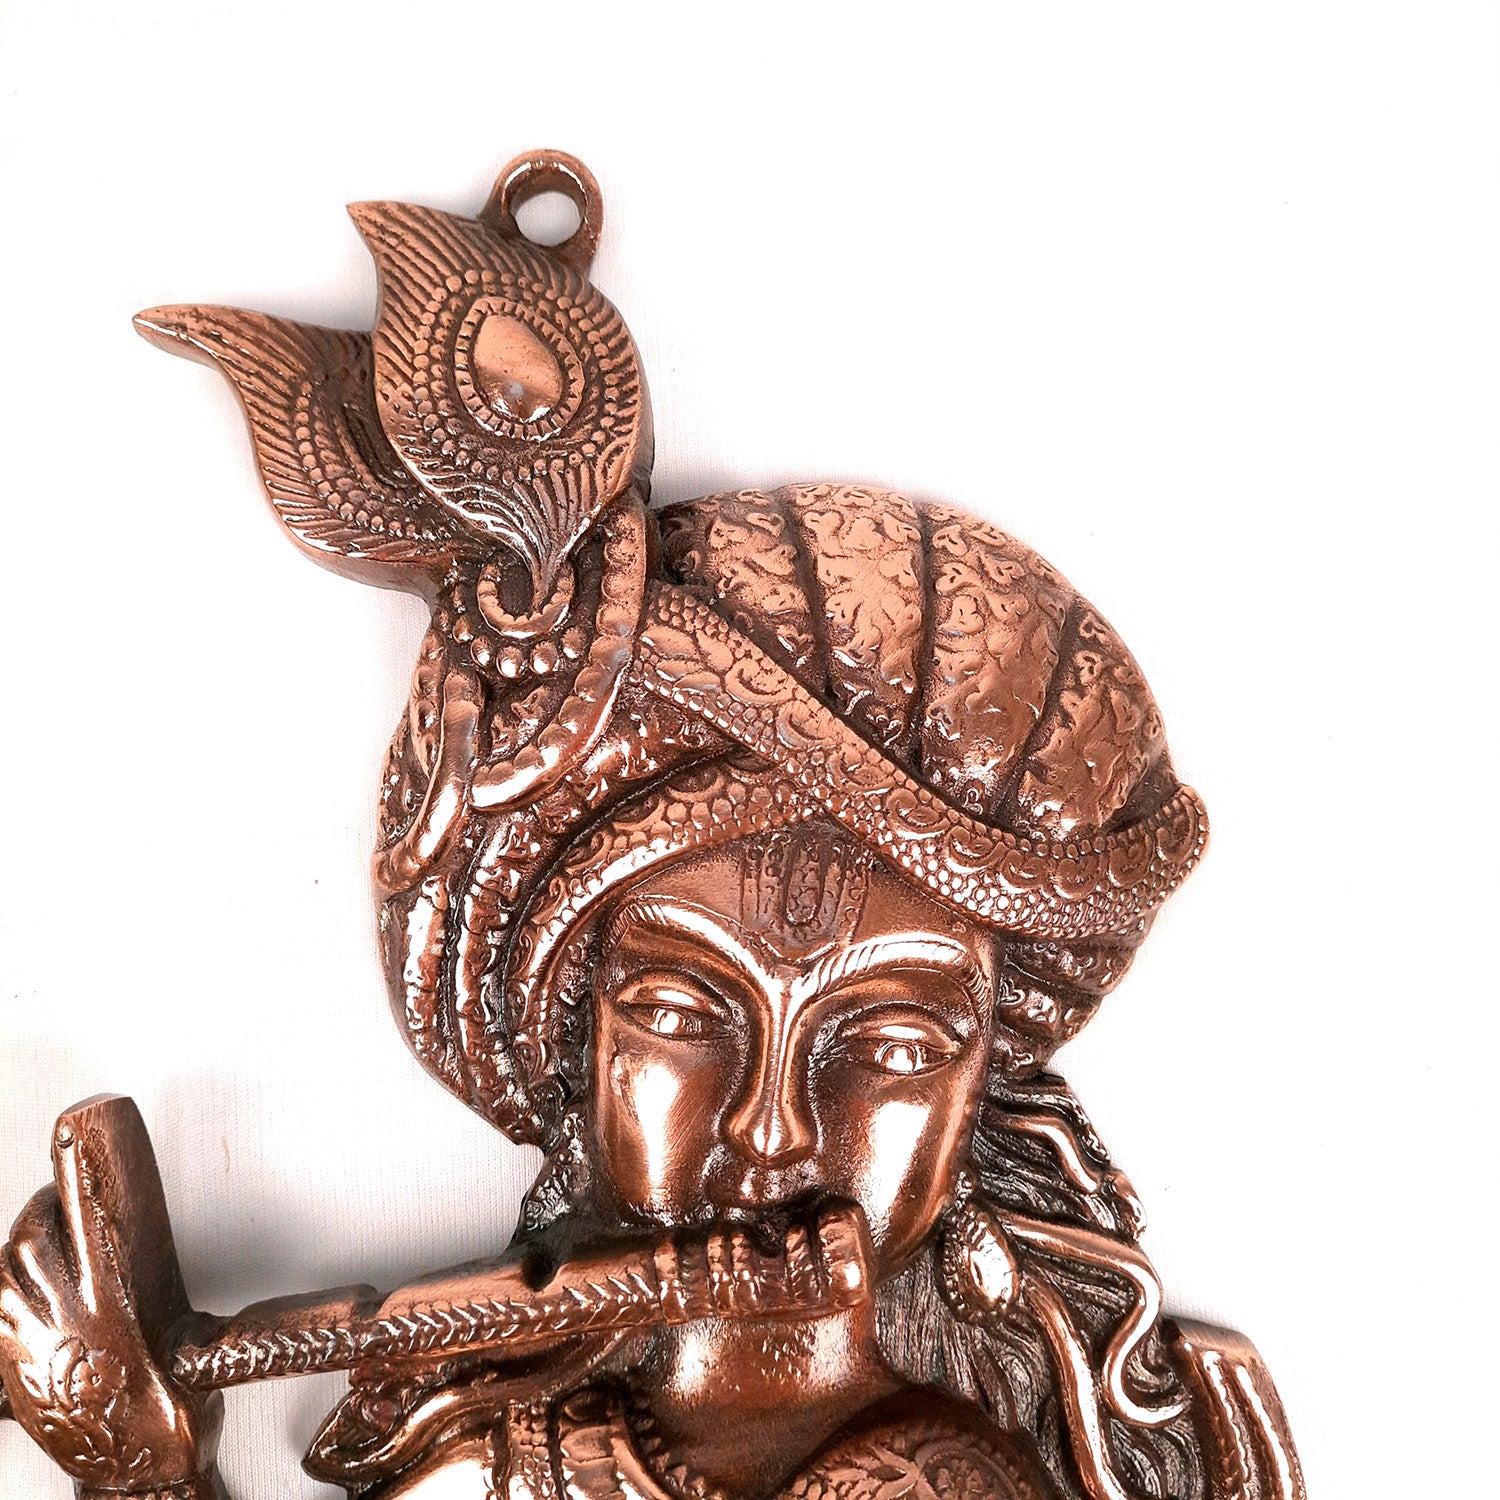 Shri Krishna Wall Hanging Idol | Lord Krishna Playing Flute Wall Hanging Statue Murti | Religious & Spiritual Art Sculpture - for Gift, Home, Living Room, Office, Puja Room Decoration - 11 Inch - Apkamart